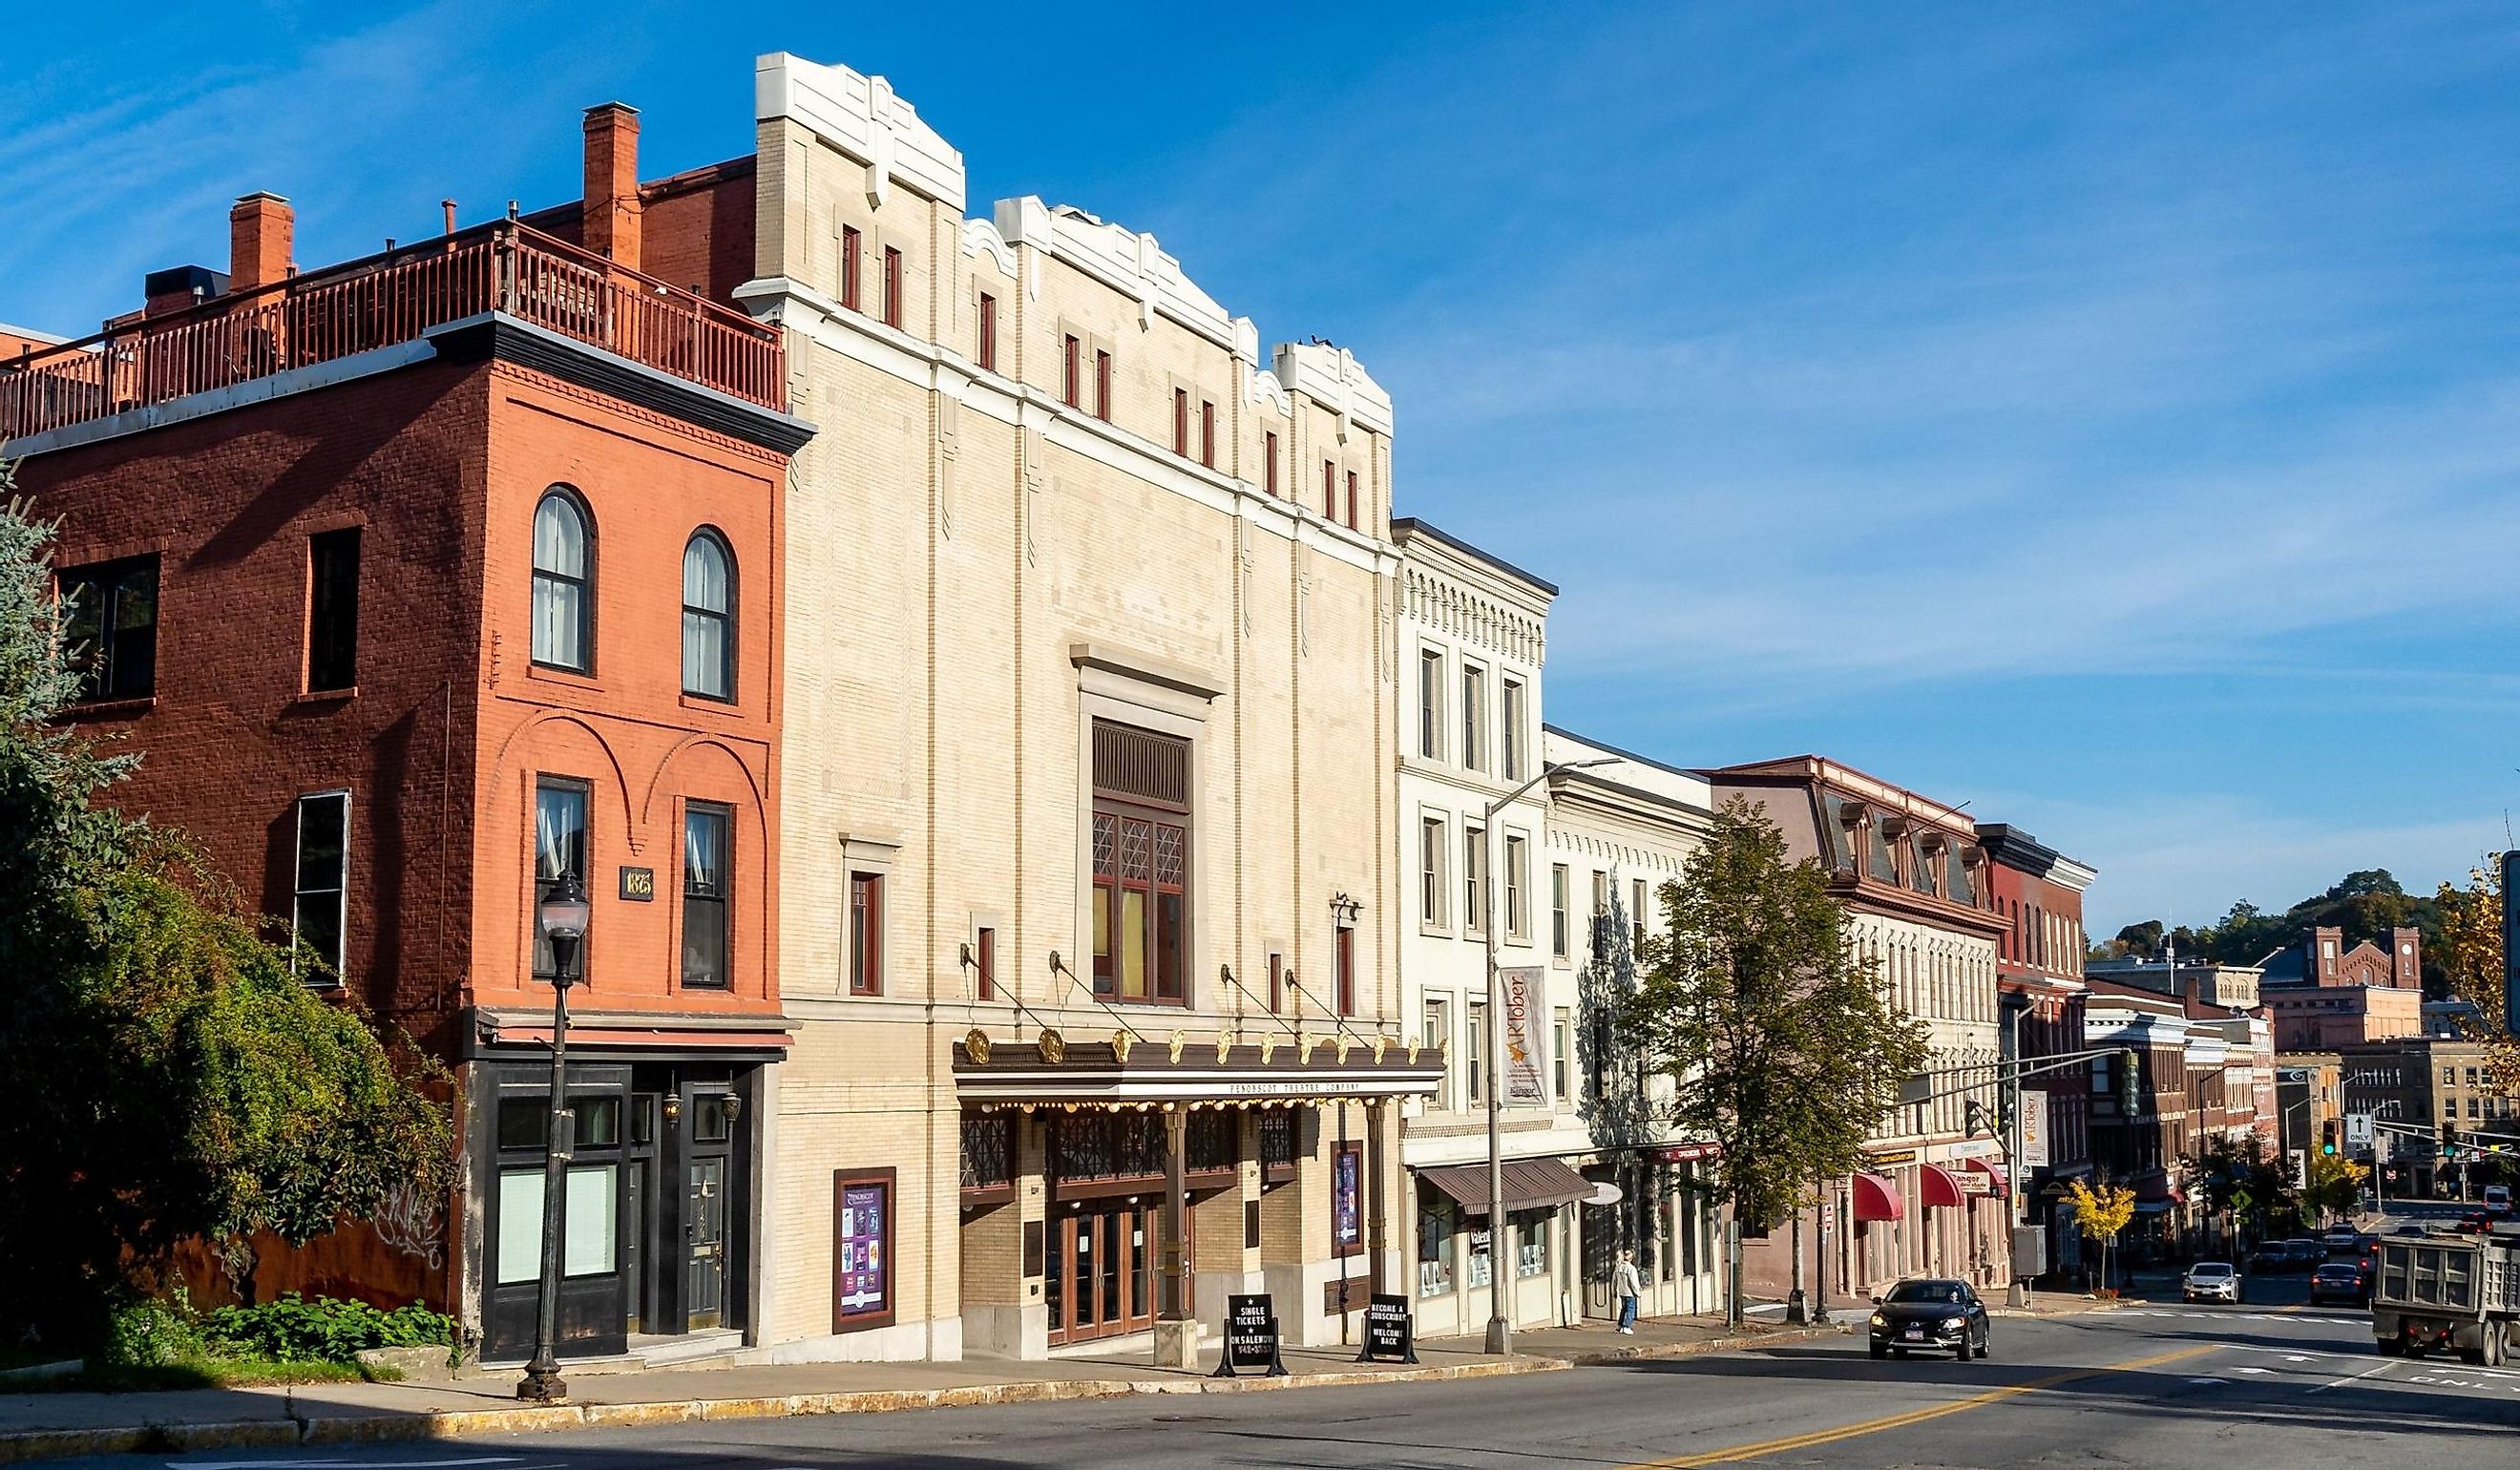 Three quarter view of the Penobscot Theatre Company on Main Street. Built in 1920 and is an early example of Art Deco and Egyptian Revival architecture in Bangor, Maine. Editorial credit: Brian Logan Photography / Shutterstock.com